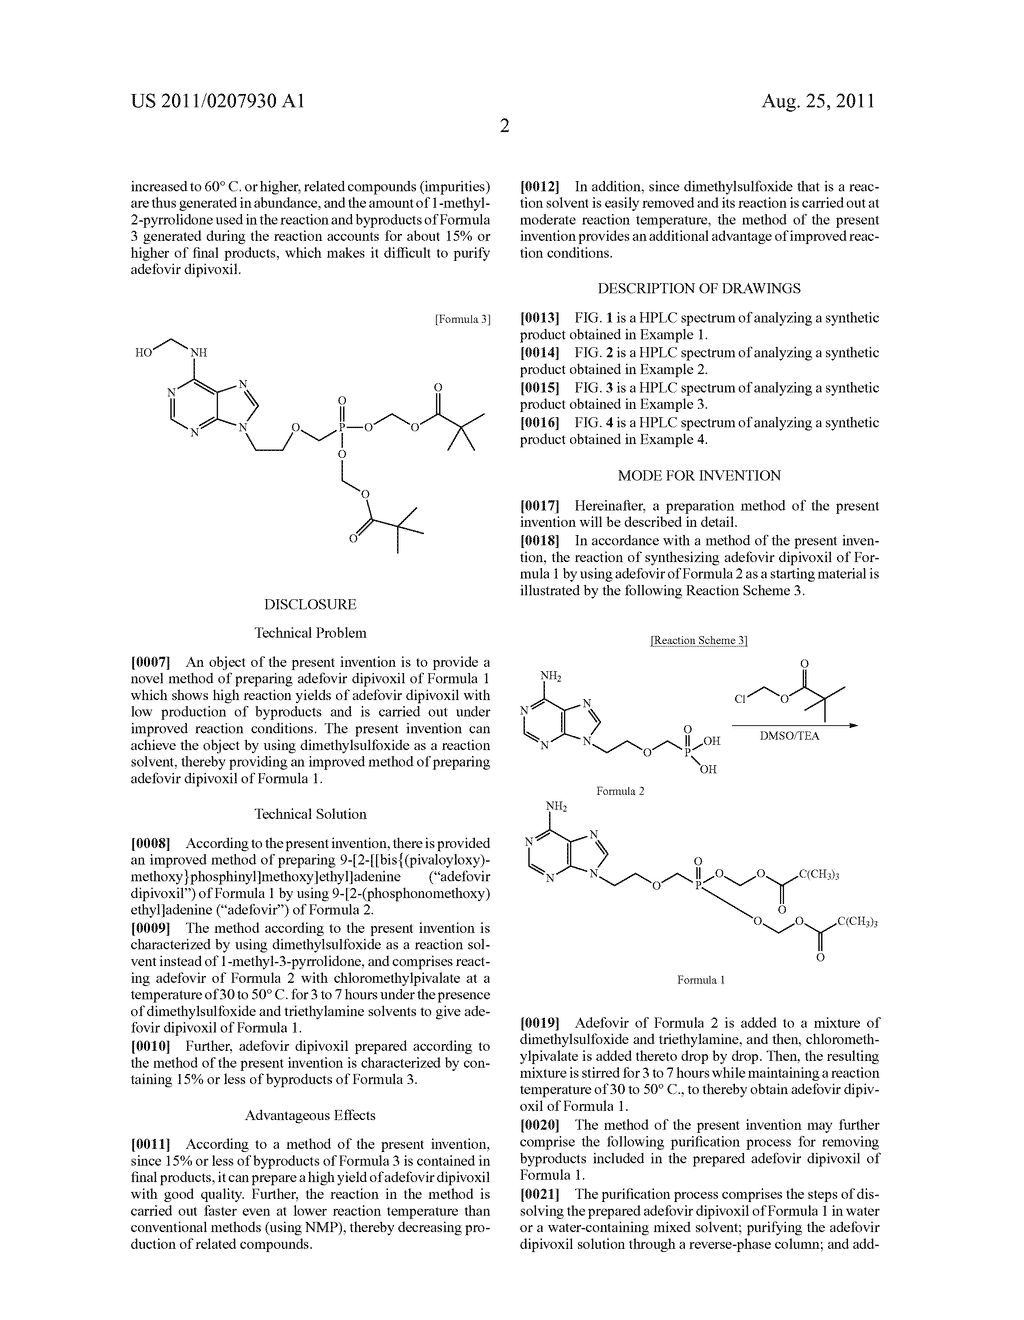 IMPROVED PRODUCTION METHOD FOR ADEFOVIR DIPIVOXIL - diagram, schematic, and image 07